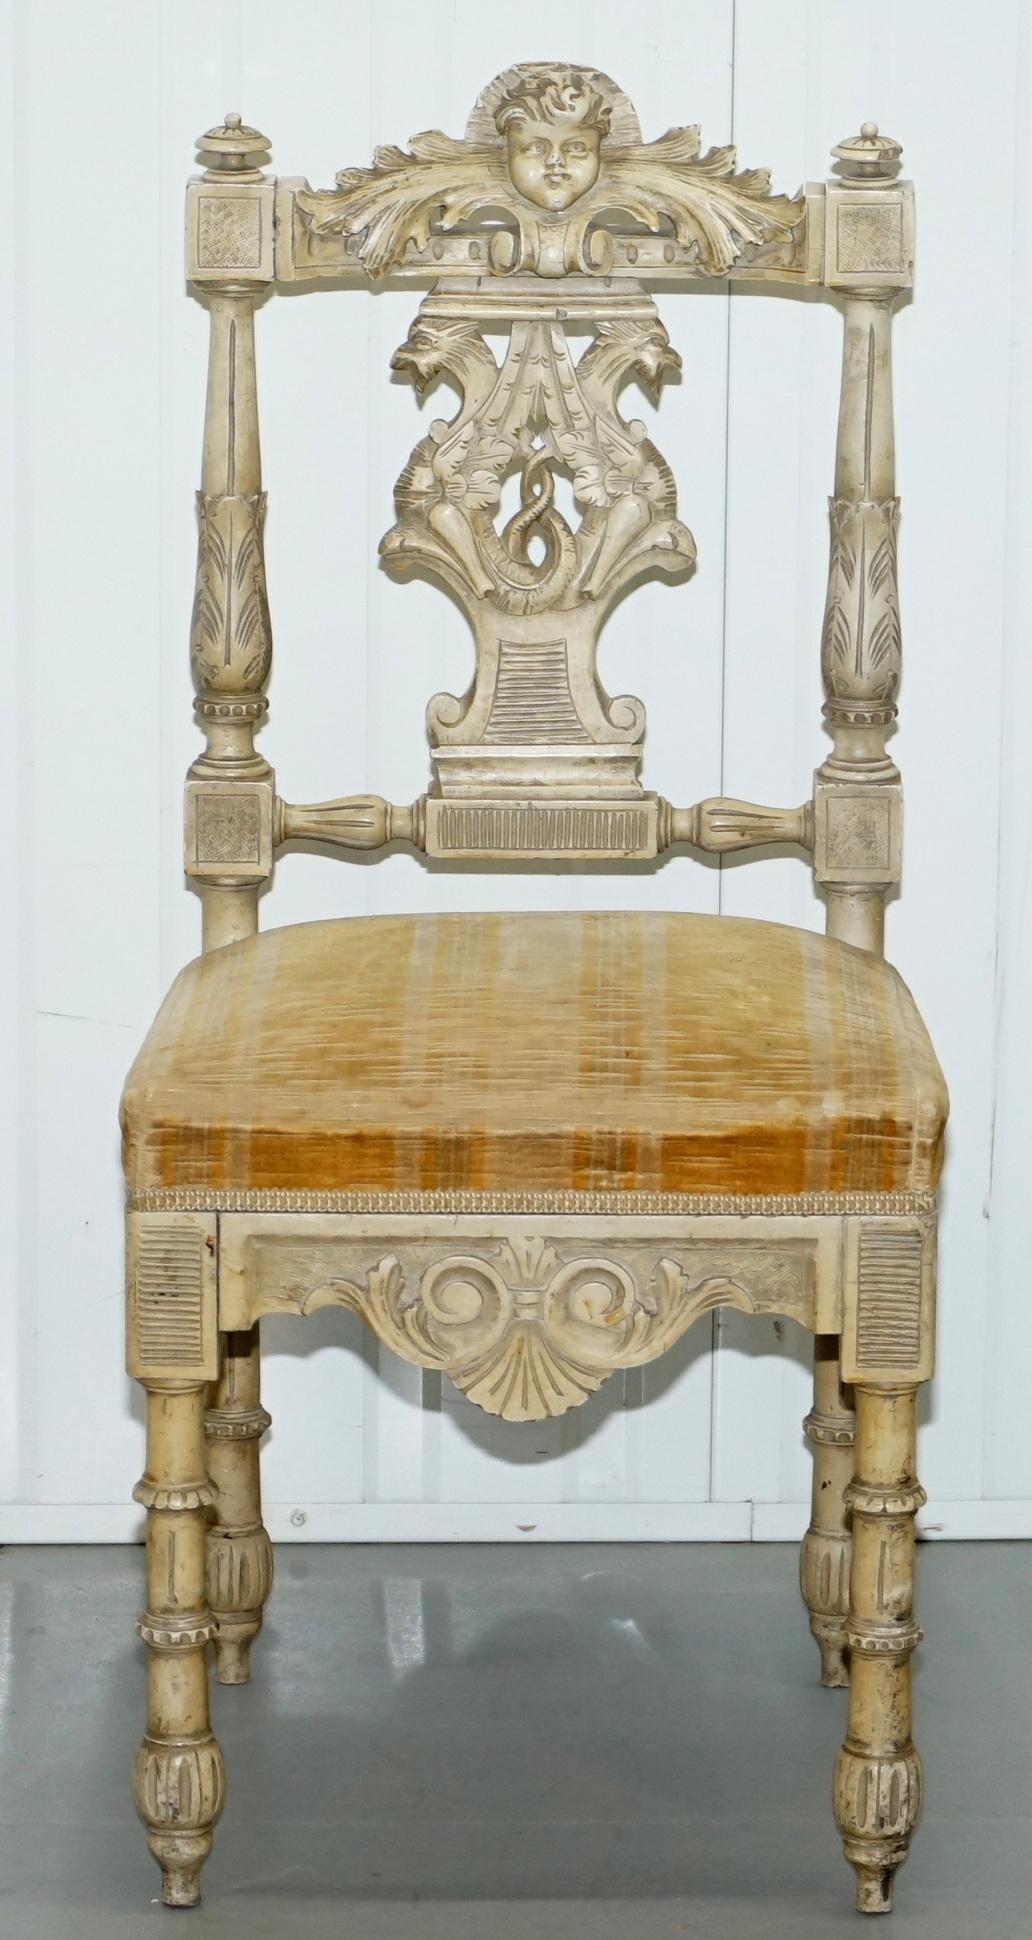 We are delighted to offer for sale this stunning antique French Louis occasional chair with Cherub carved detailing

Please note the delivery fee listed is just a guide, it covers within the M25 only, for an accurate quote please send me your